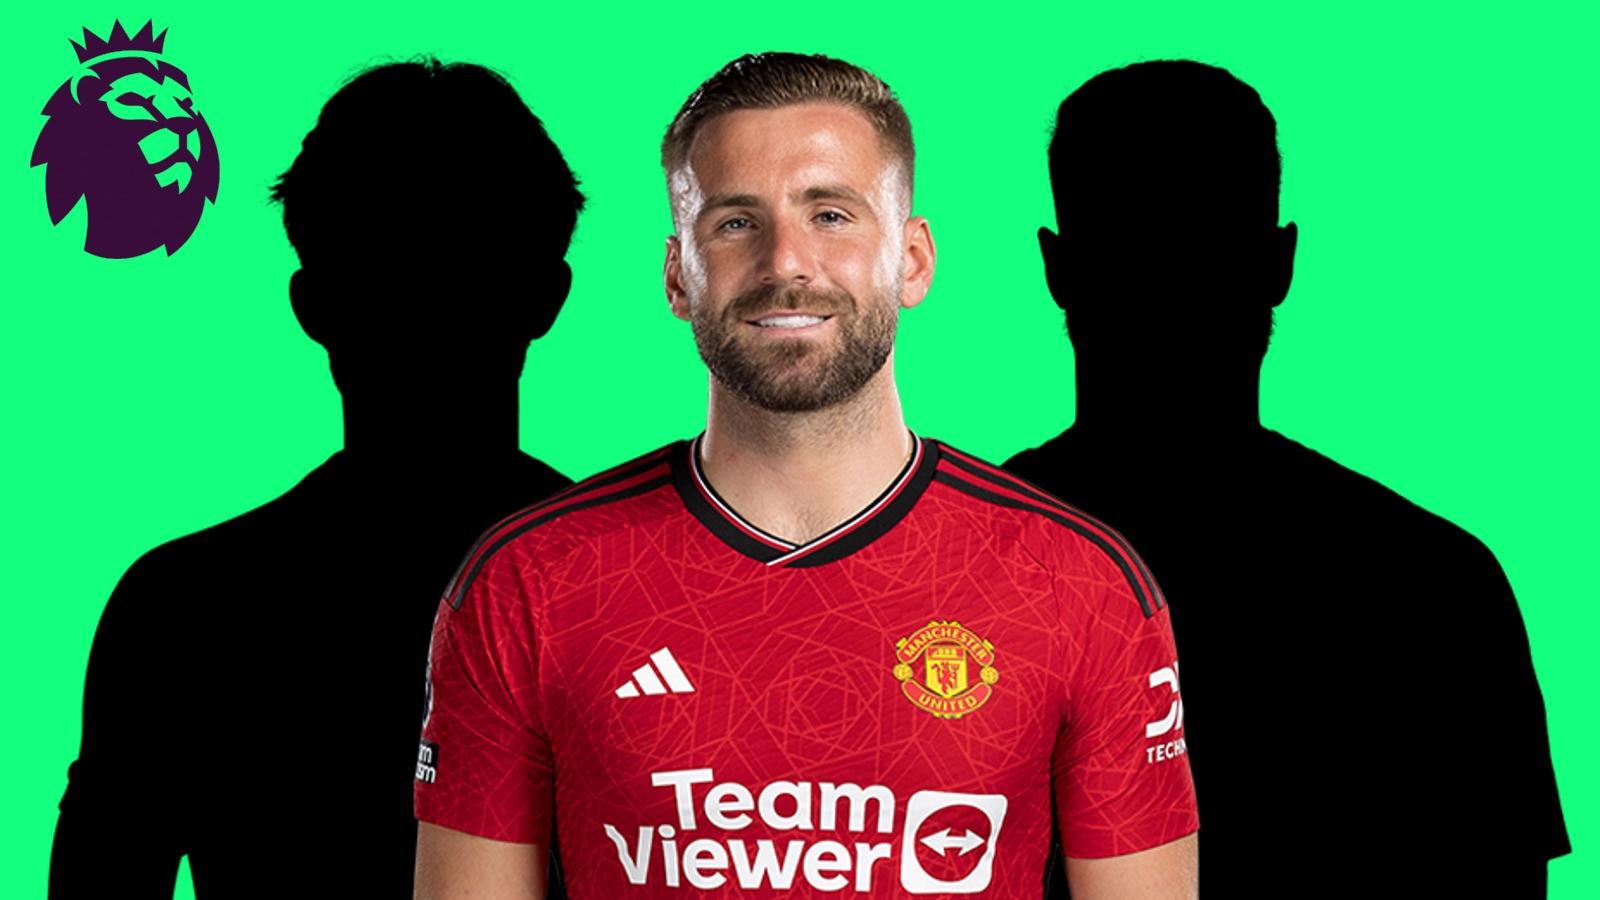 Luke Shaw with FPL background and player replacements